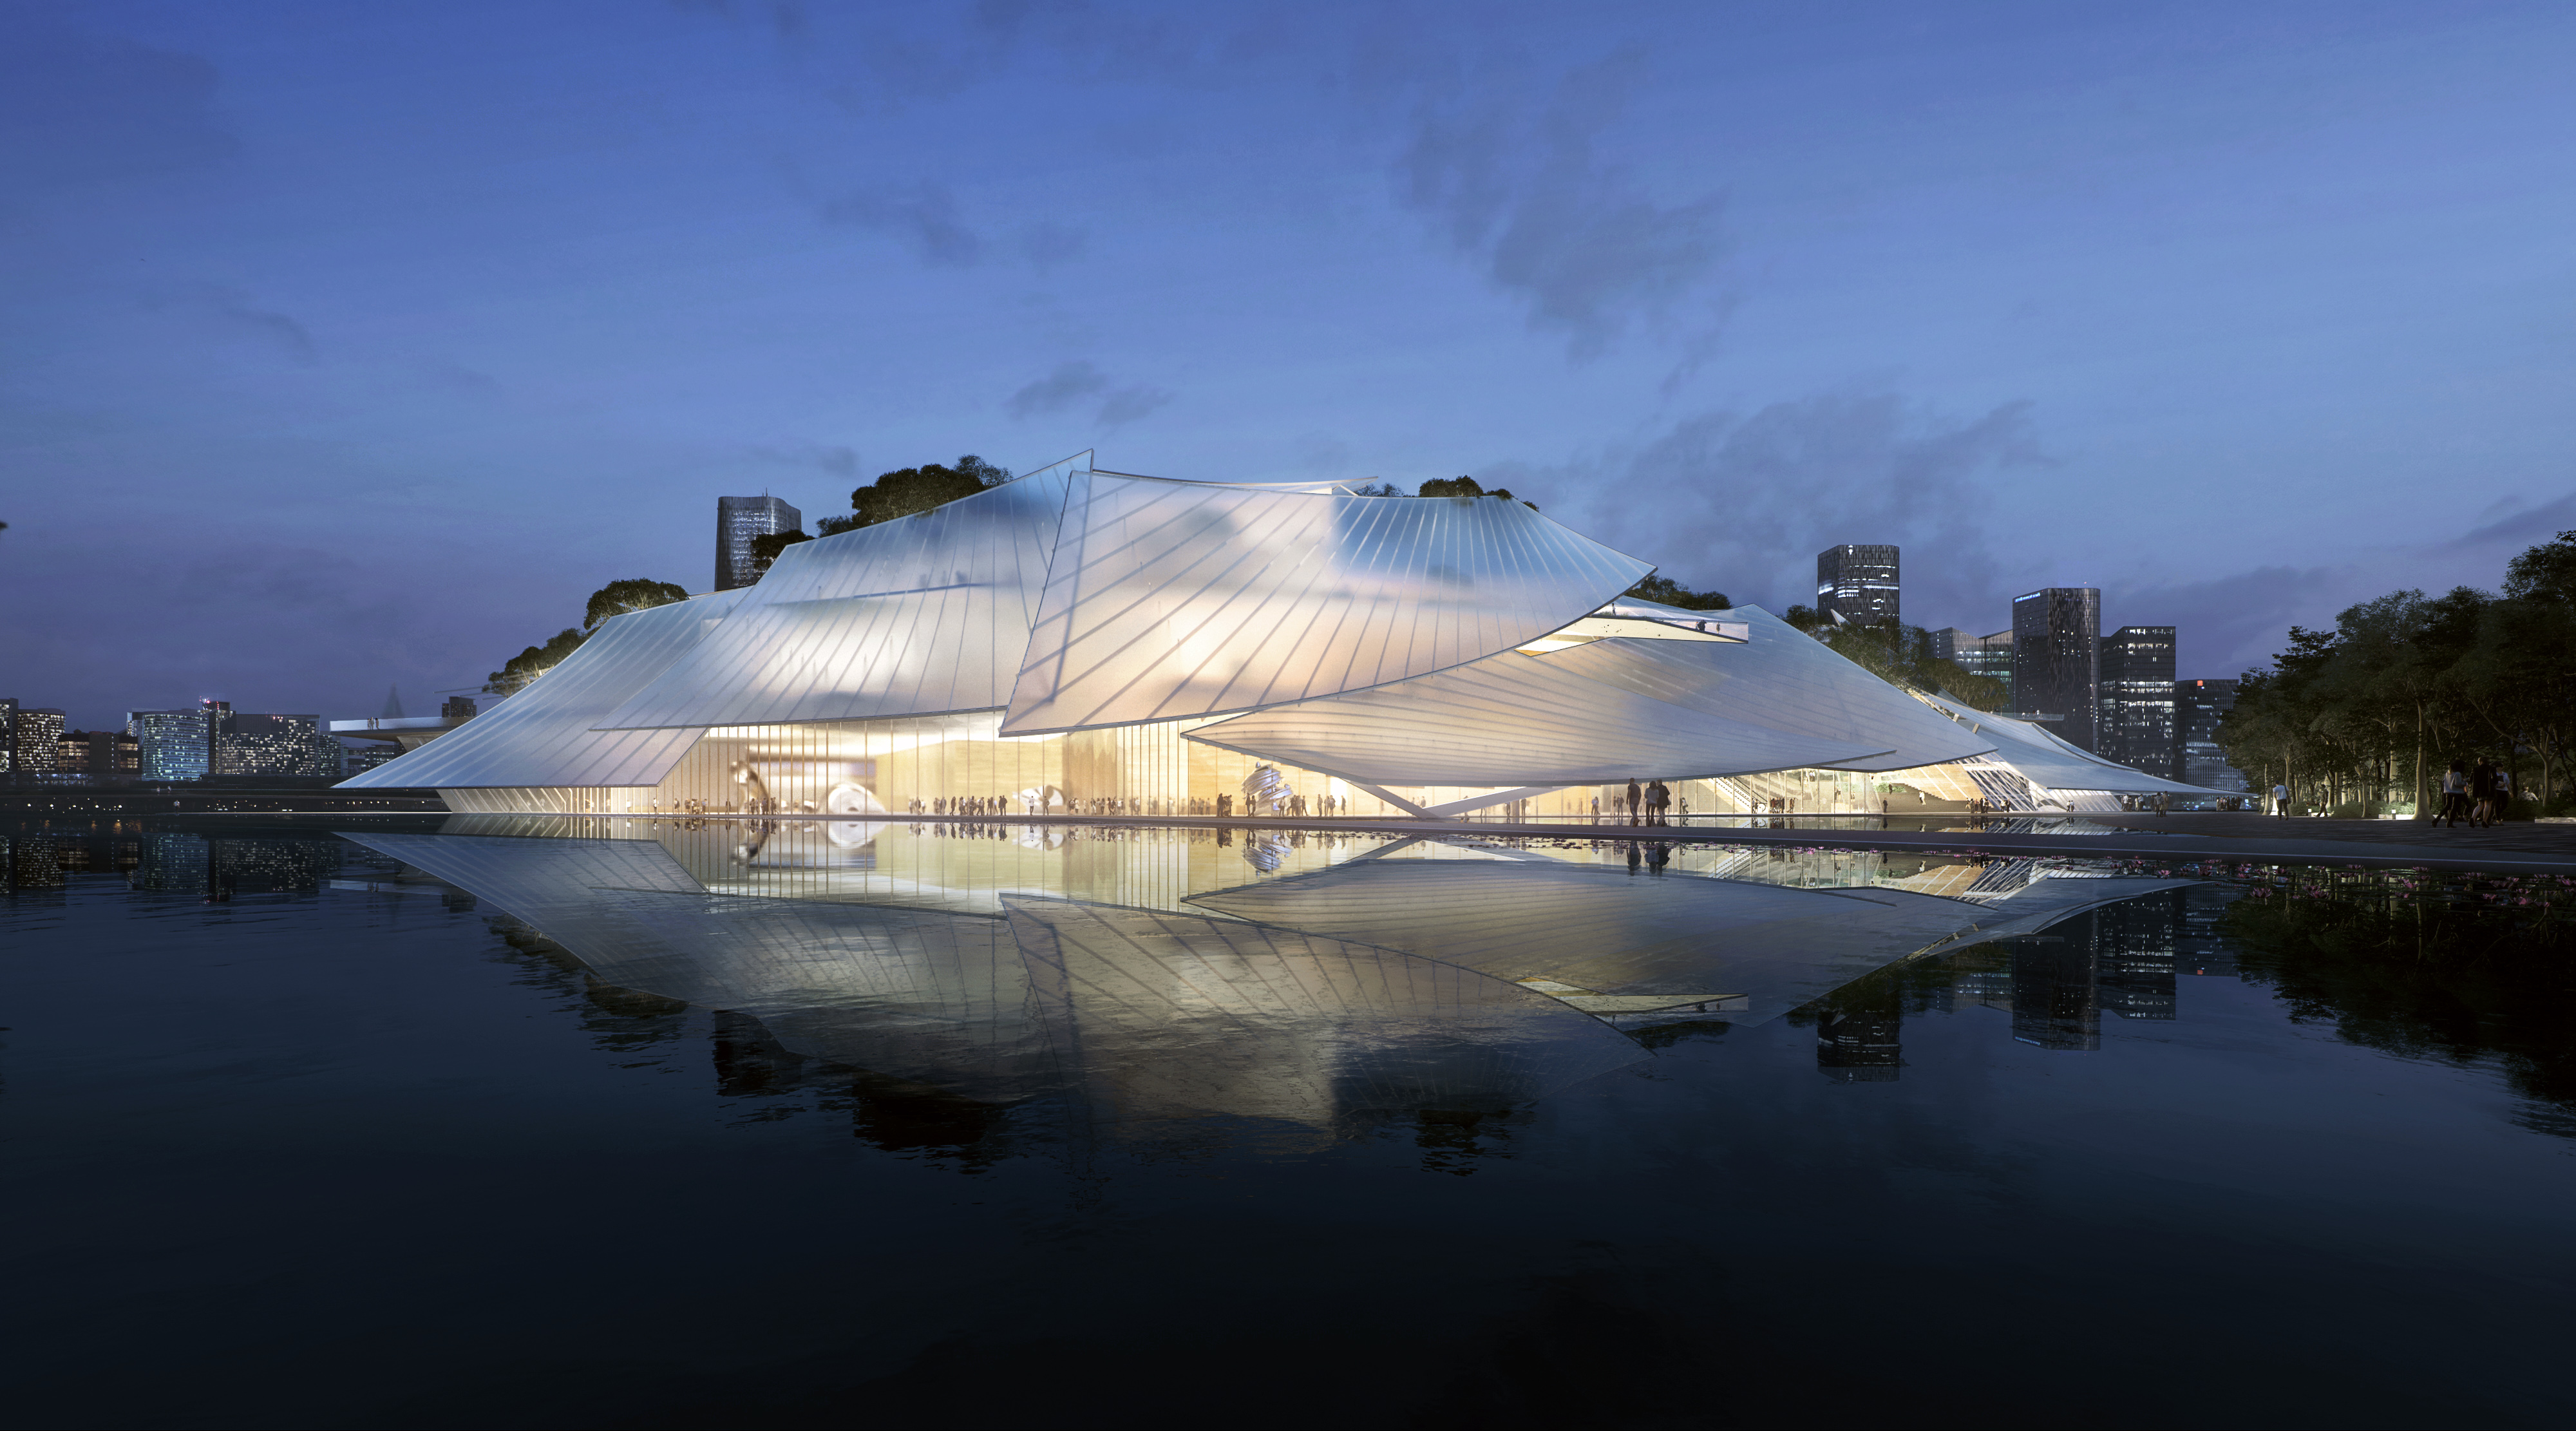 Rendering for Yiwu Grand Theatre, by MAD. All images courtesy of MAD